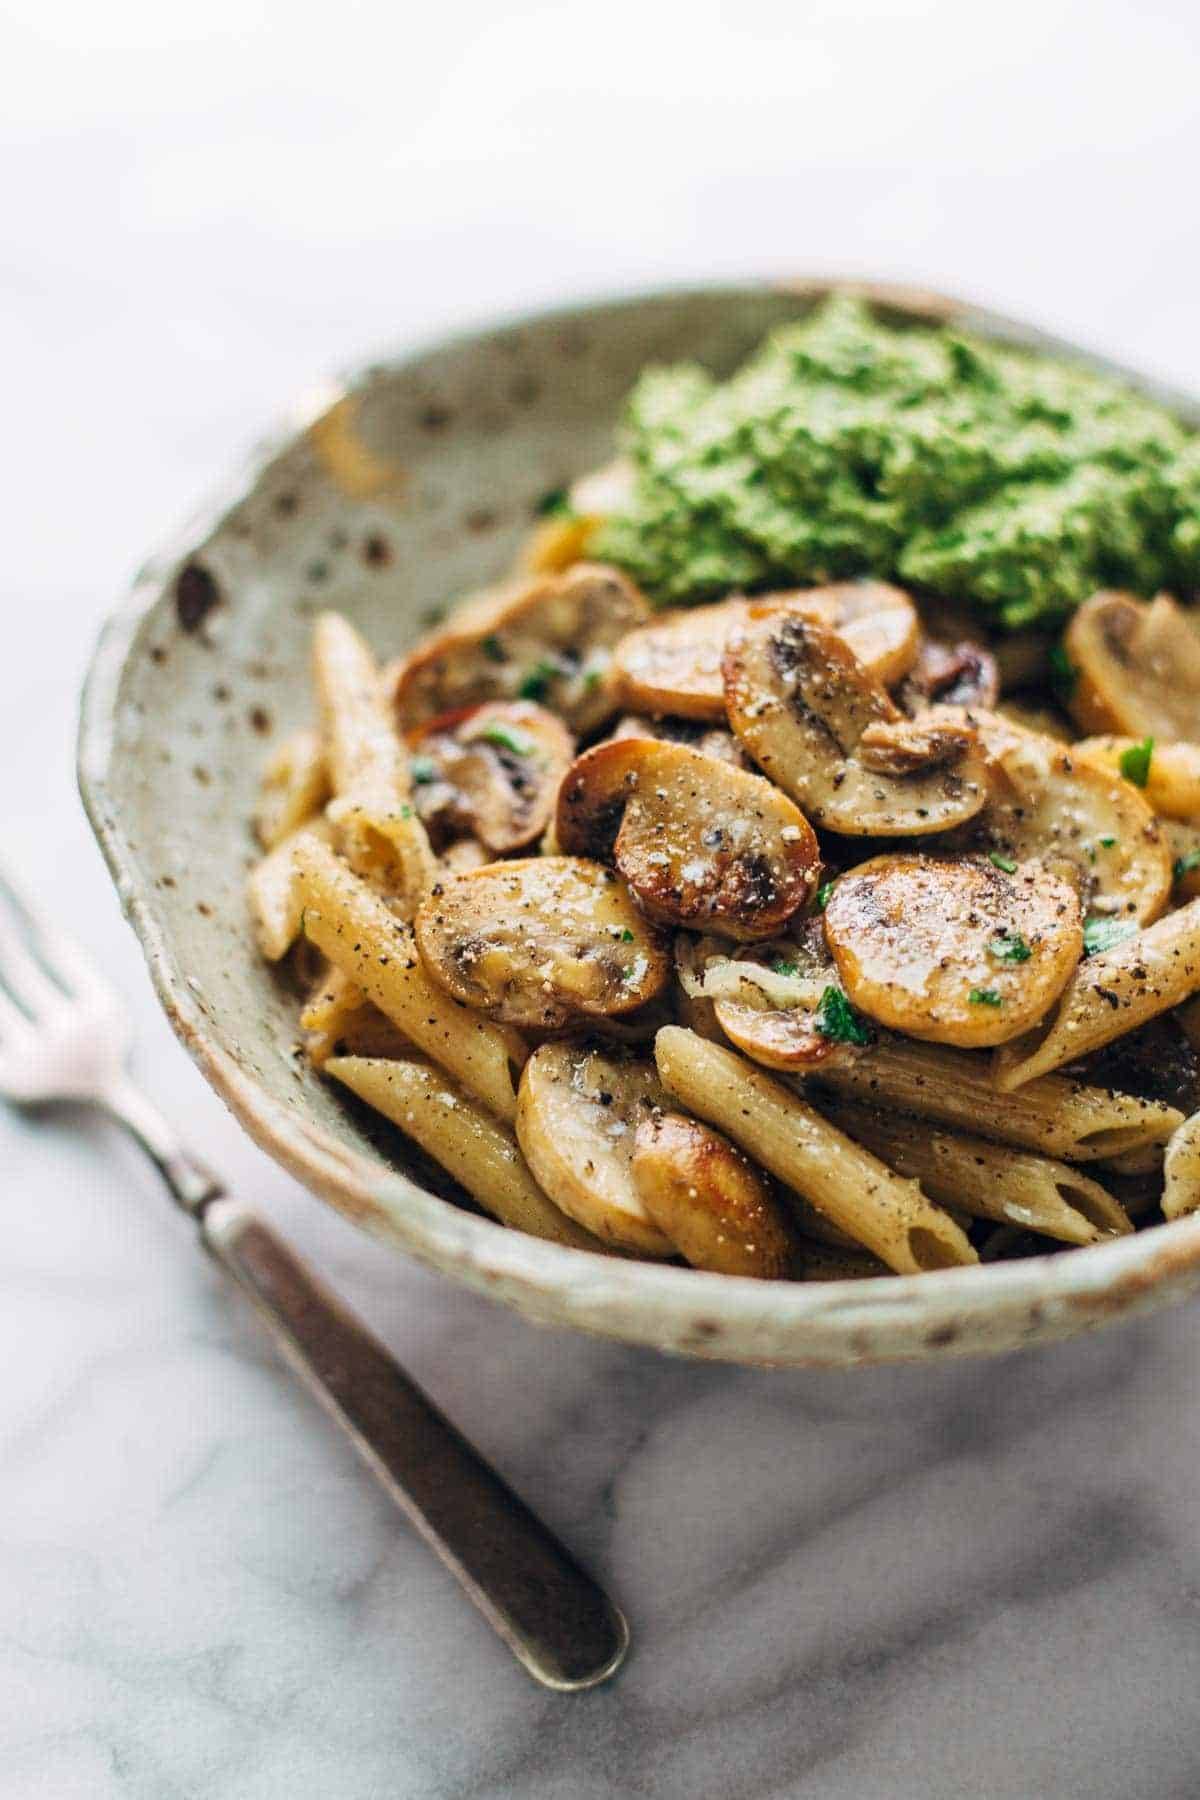 Simple Mushroom Penne with Walnut Pesto - made with easy ingredients like Parmesan cheese, whole wheat penne, mushrooms, garlic, and butter. Vegetarian. | pinchofyum.com